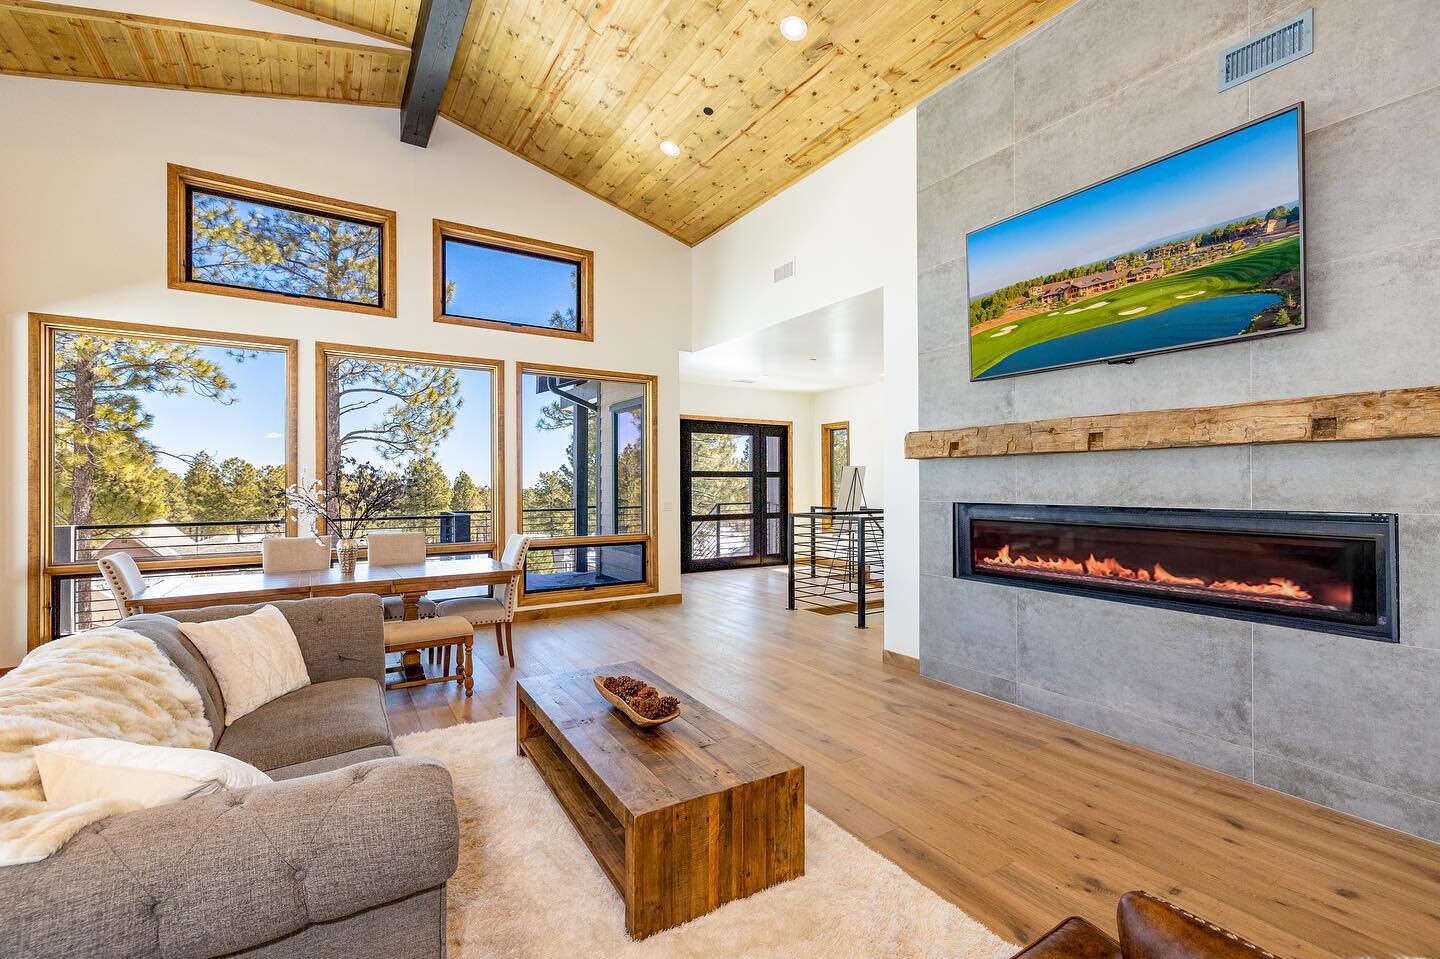 Flagstaff Ranch New Build🌲

$2,099,000 💵

4 Bed | 4 Bath | 4 Car Garage | 3,660 sqft 

Thoughtfully designed modern cabin in the prestigious gated community of Flagstaff Ranch. Complete with a heated driveway, two laundry rooms, two primary suites,